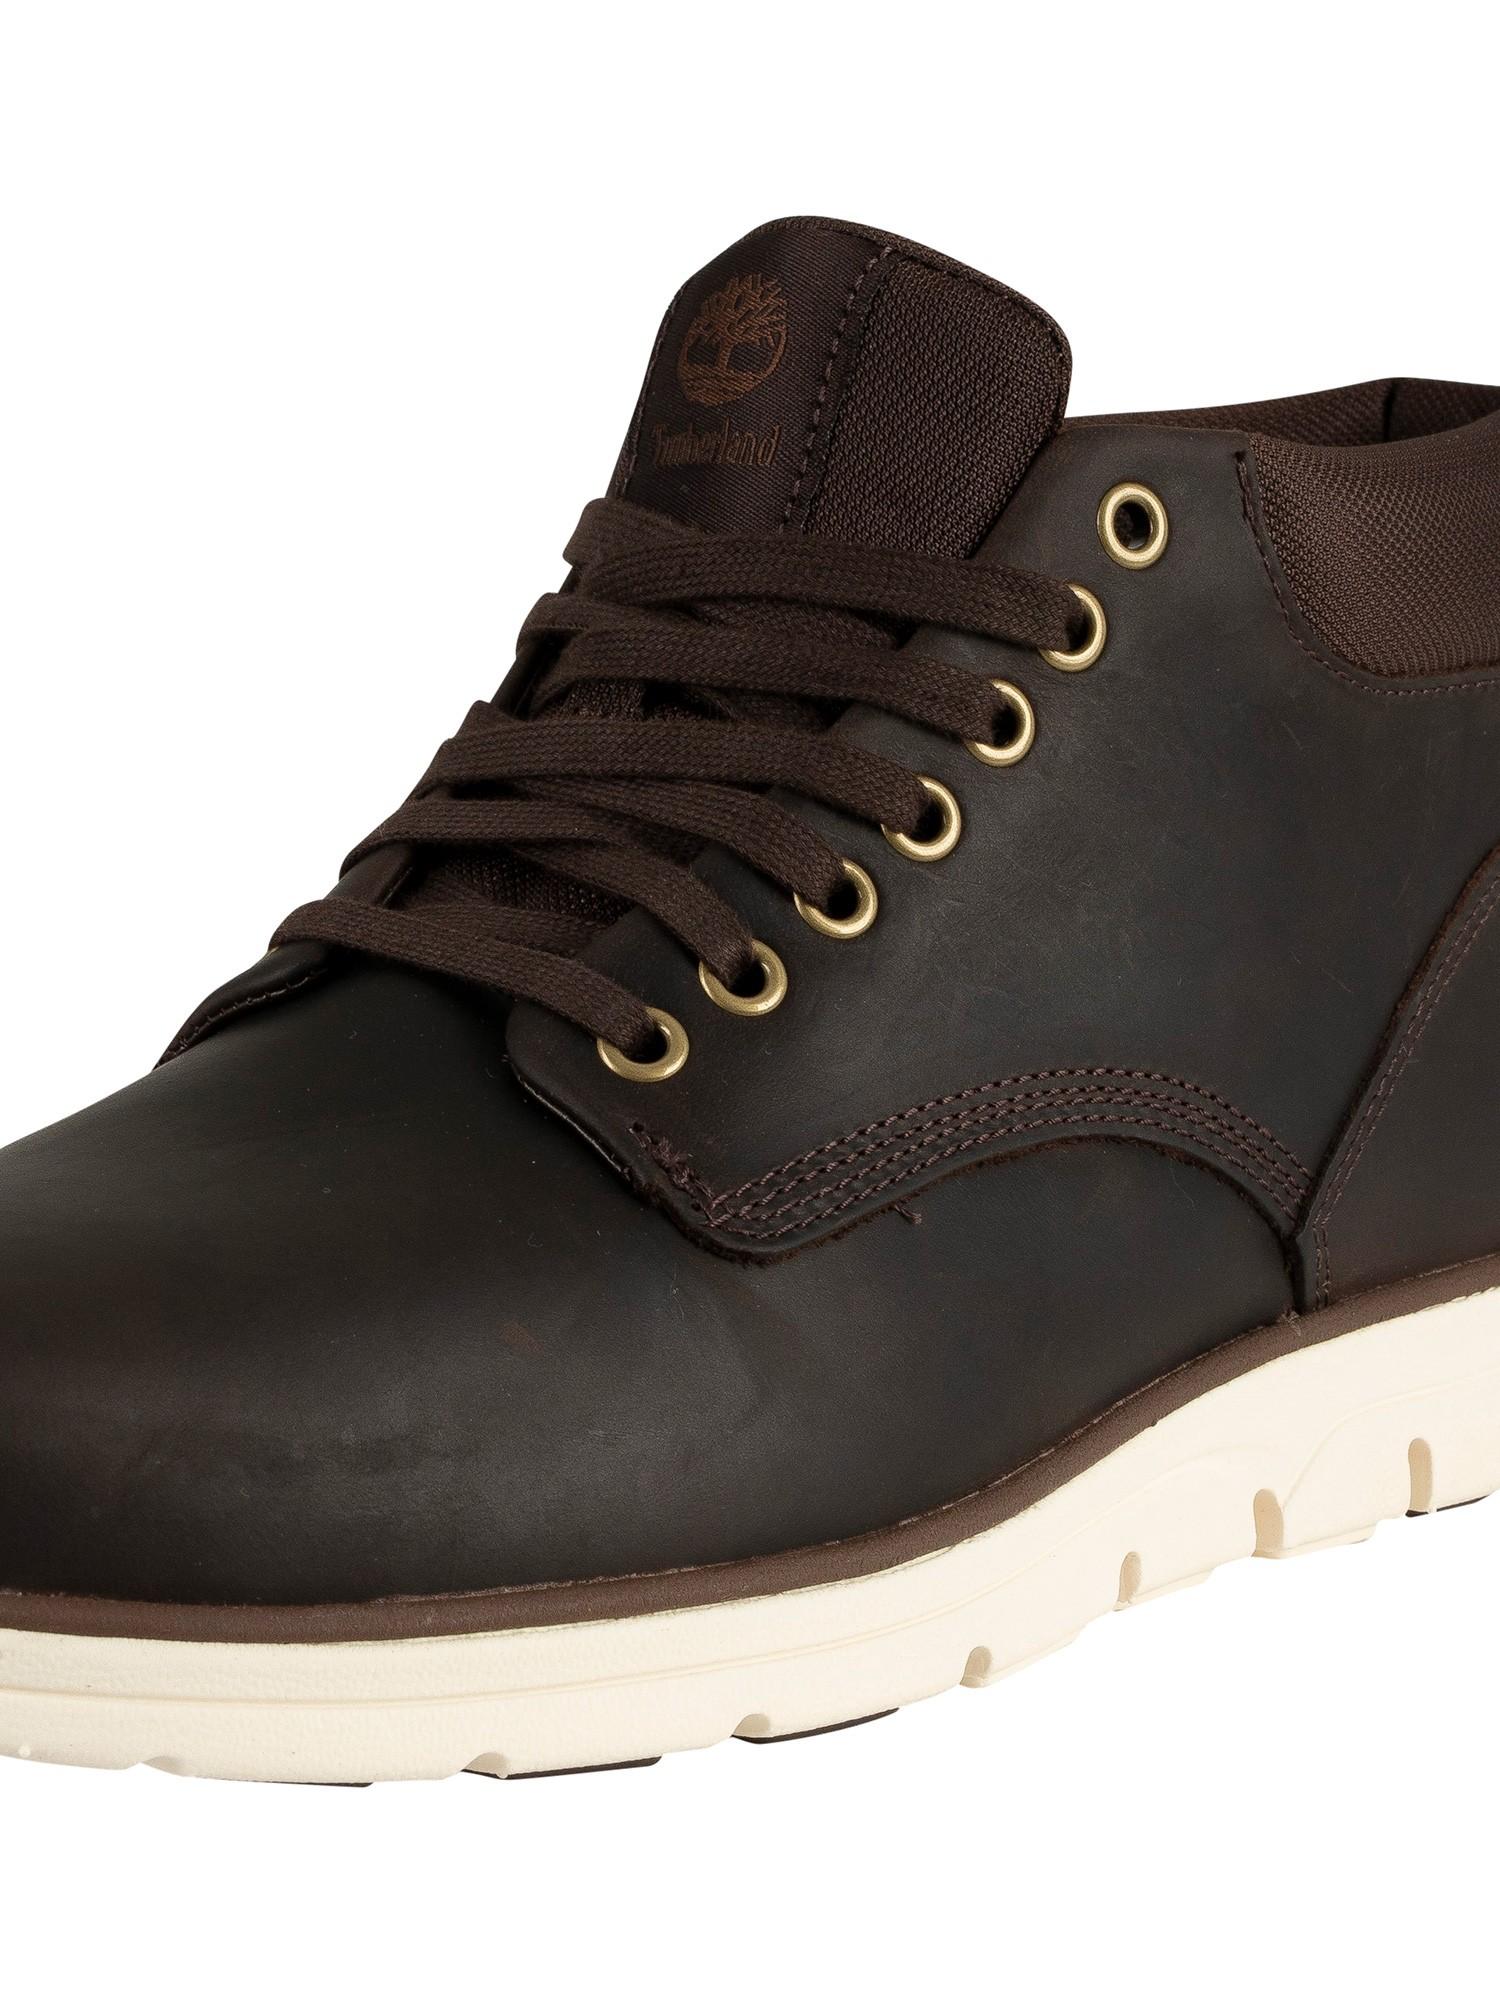 Timberland Bradstreet Chukka Leather Boots in Brown for Men | Lyst Canada